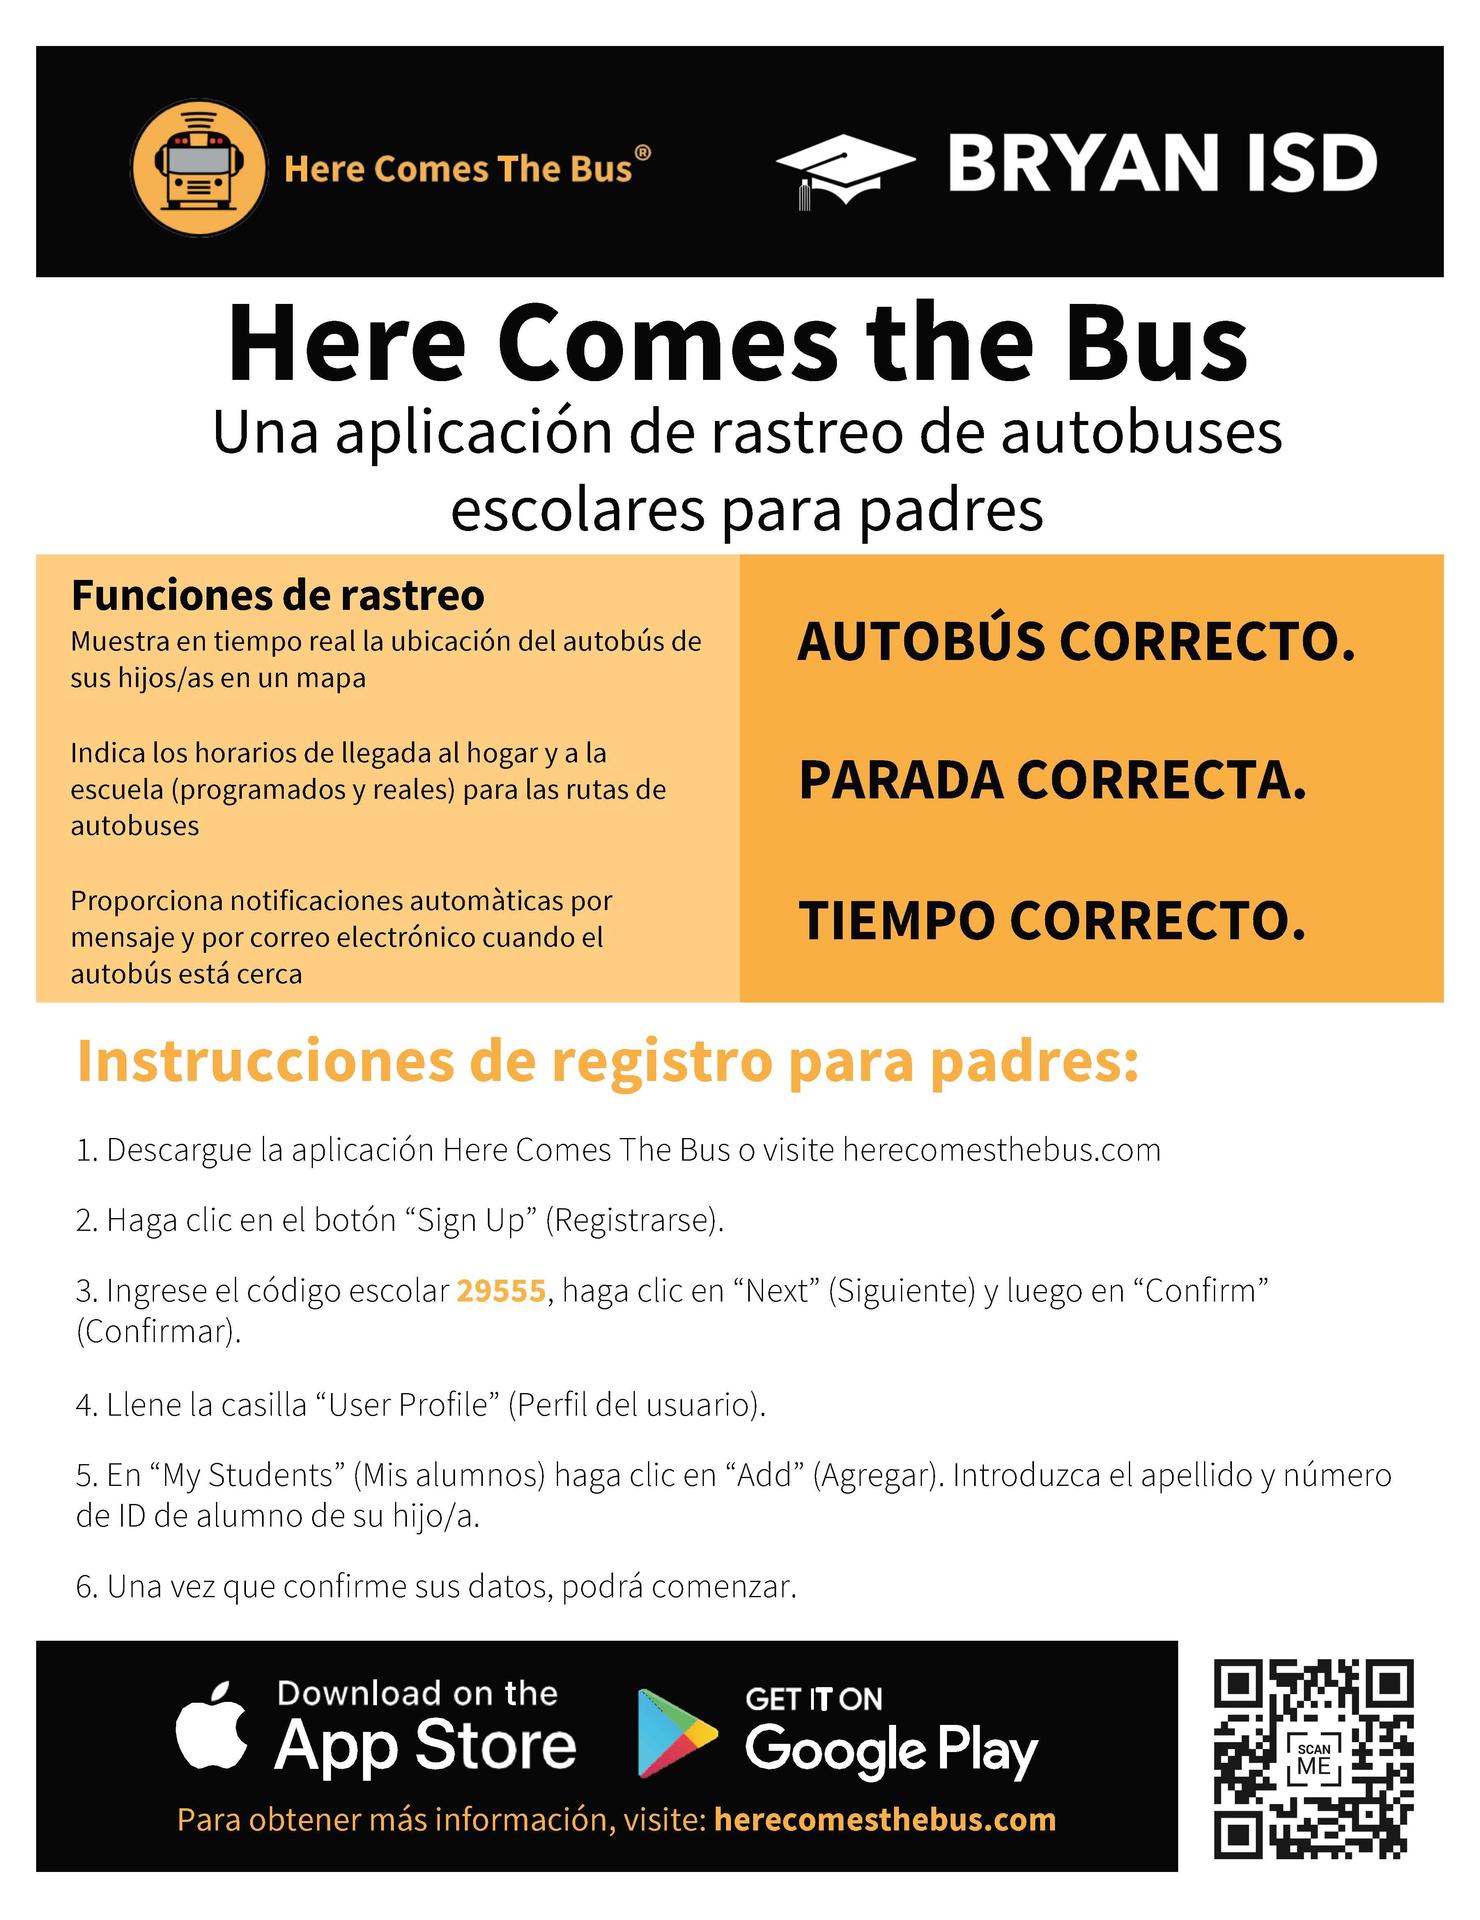 Here Comes the Bus Flyer